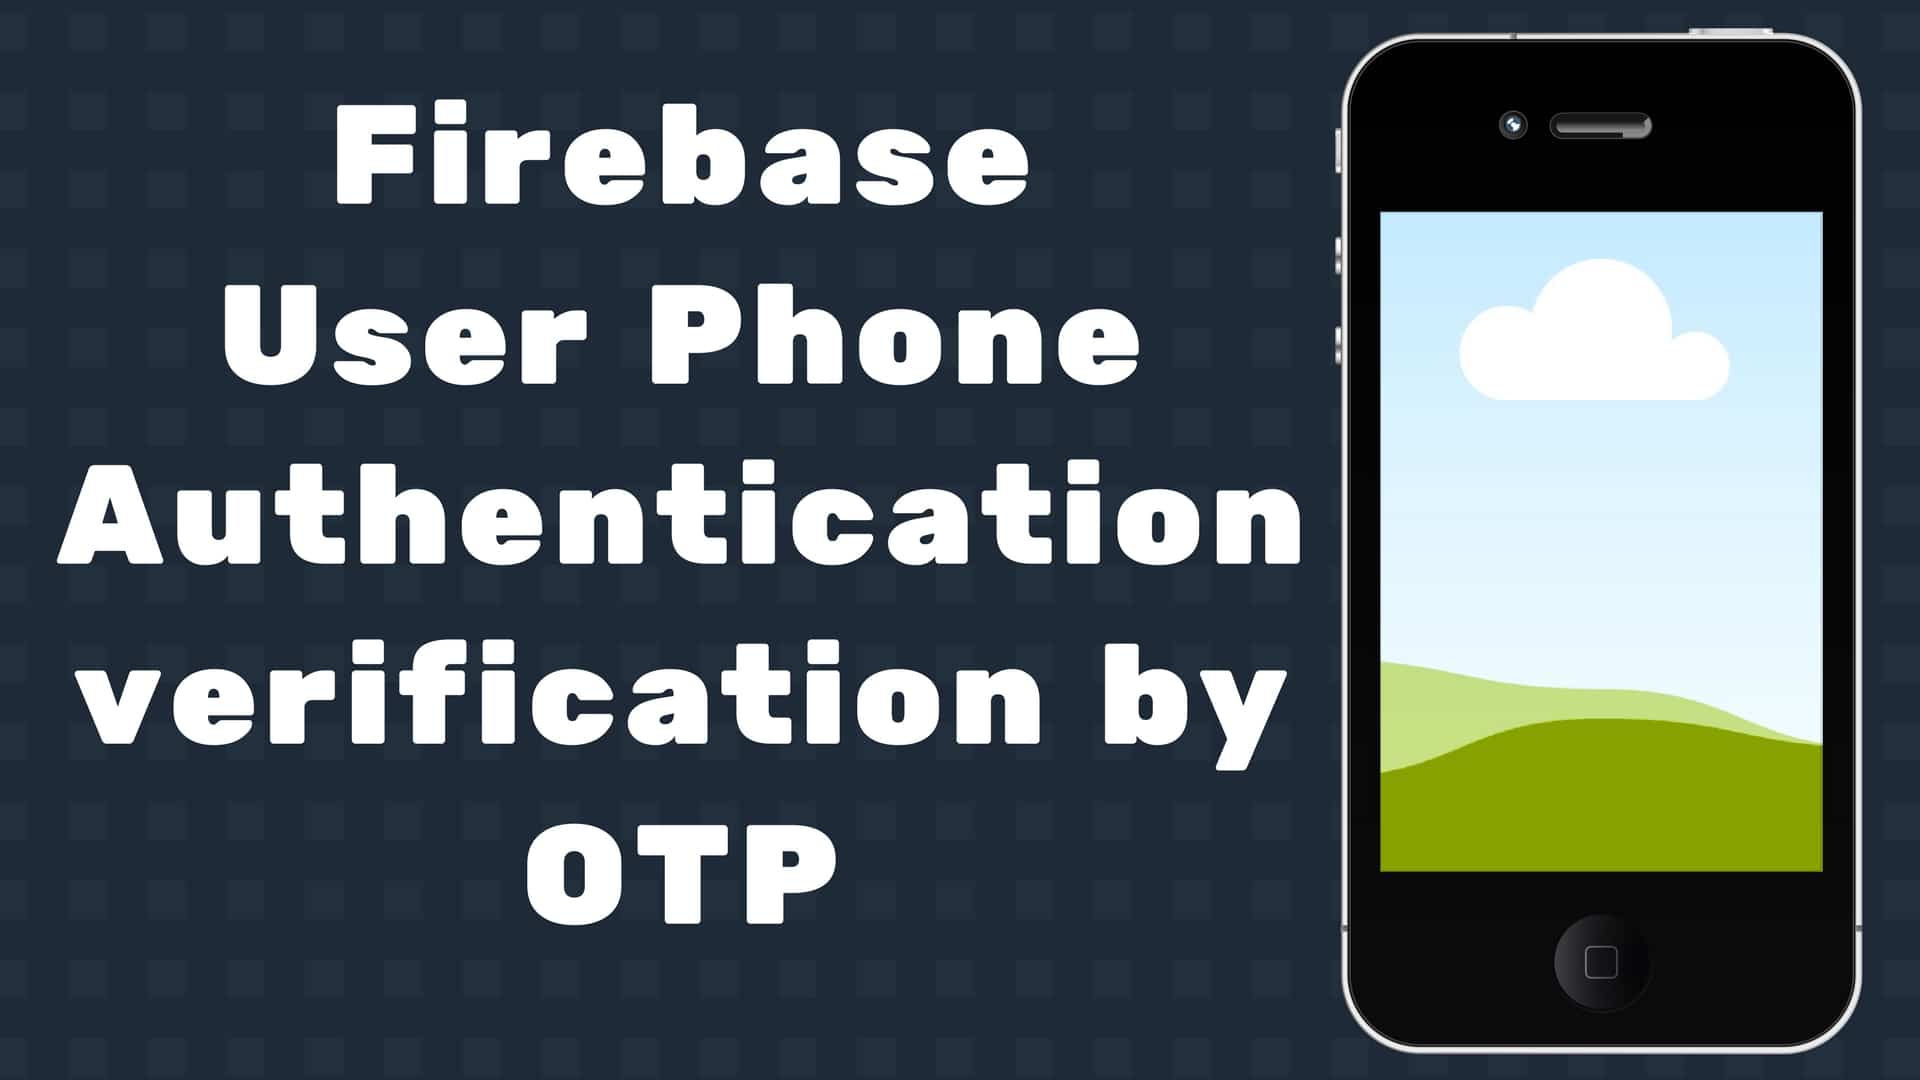 Firebase User Phone Authentication verification by otp in Android